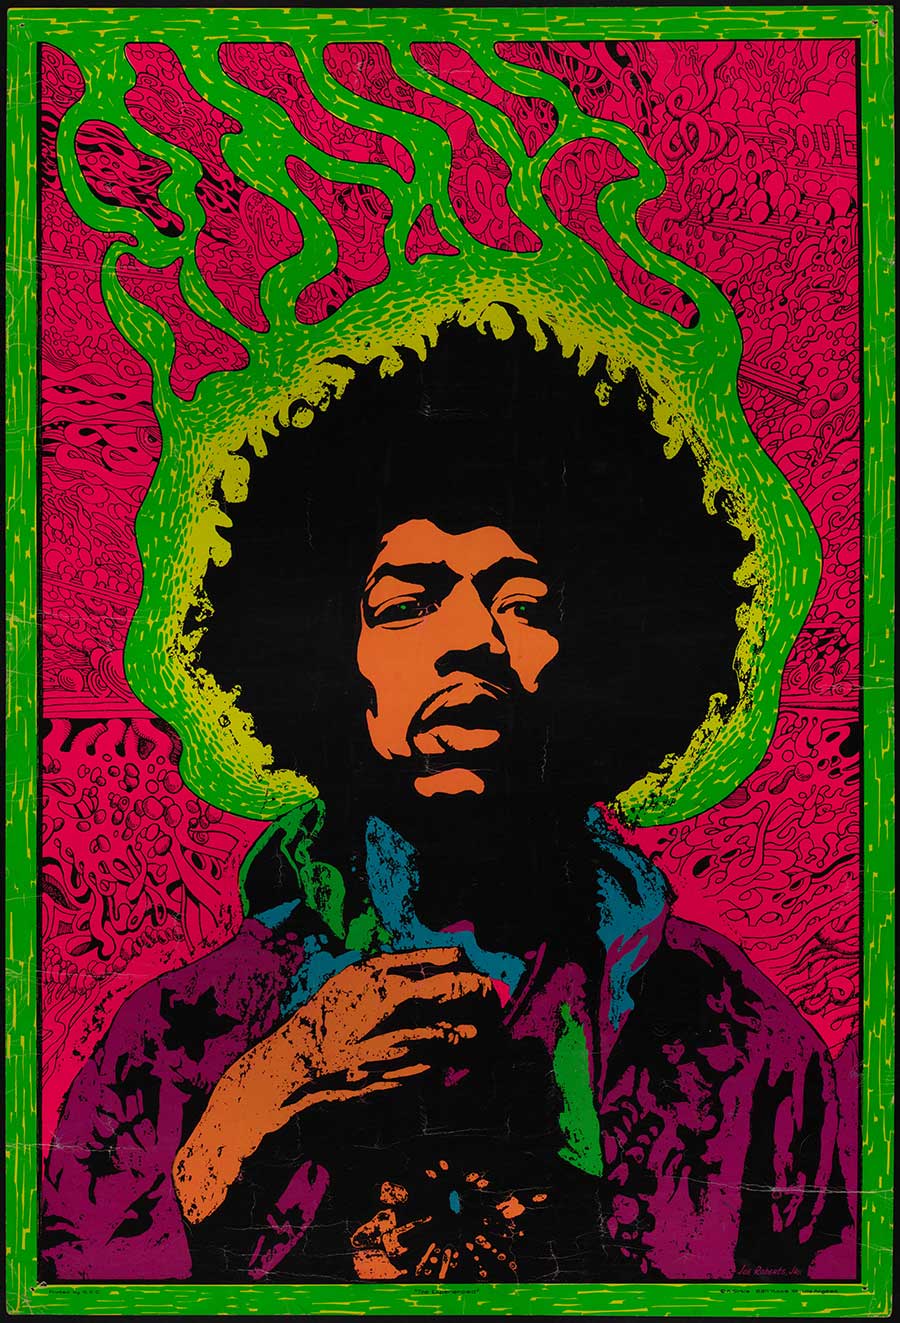 A poster of Jimi Hendrix.